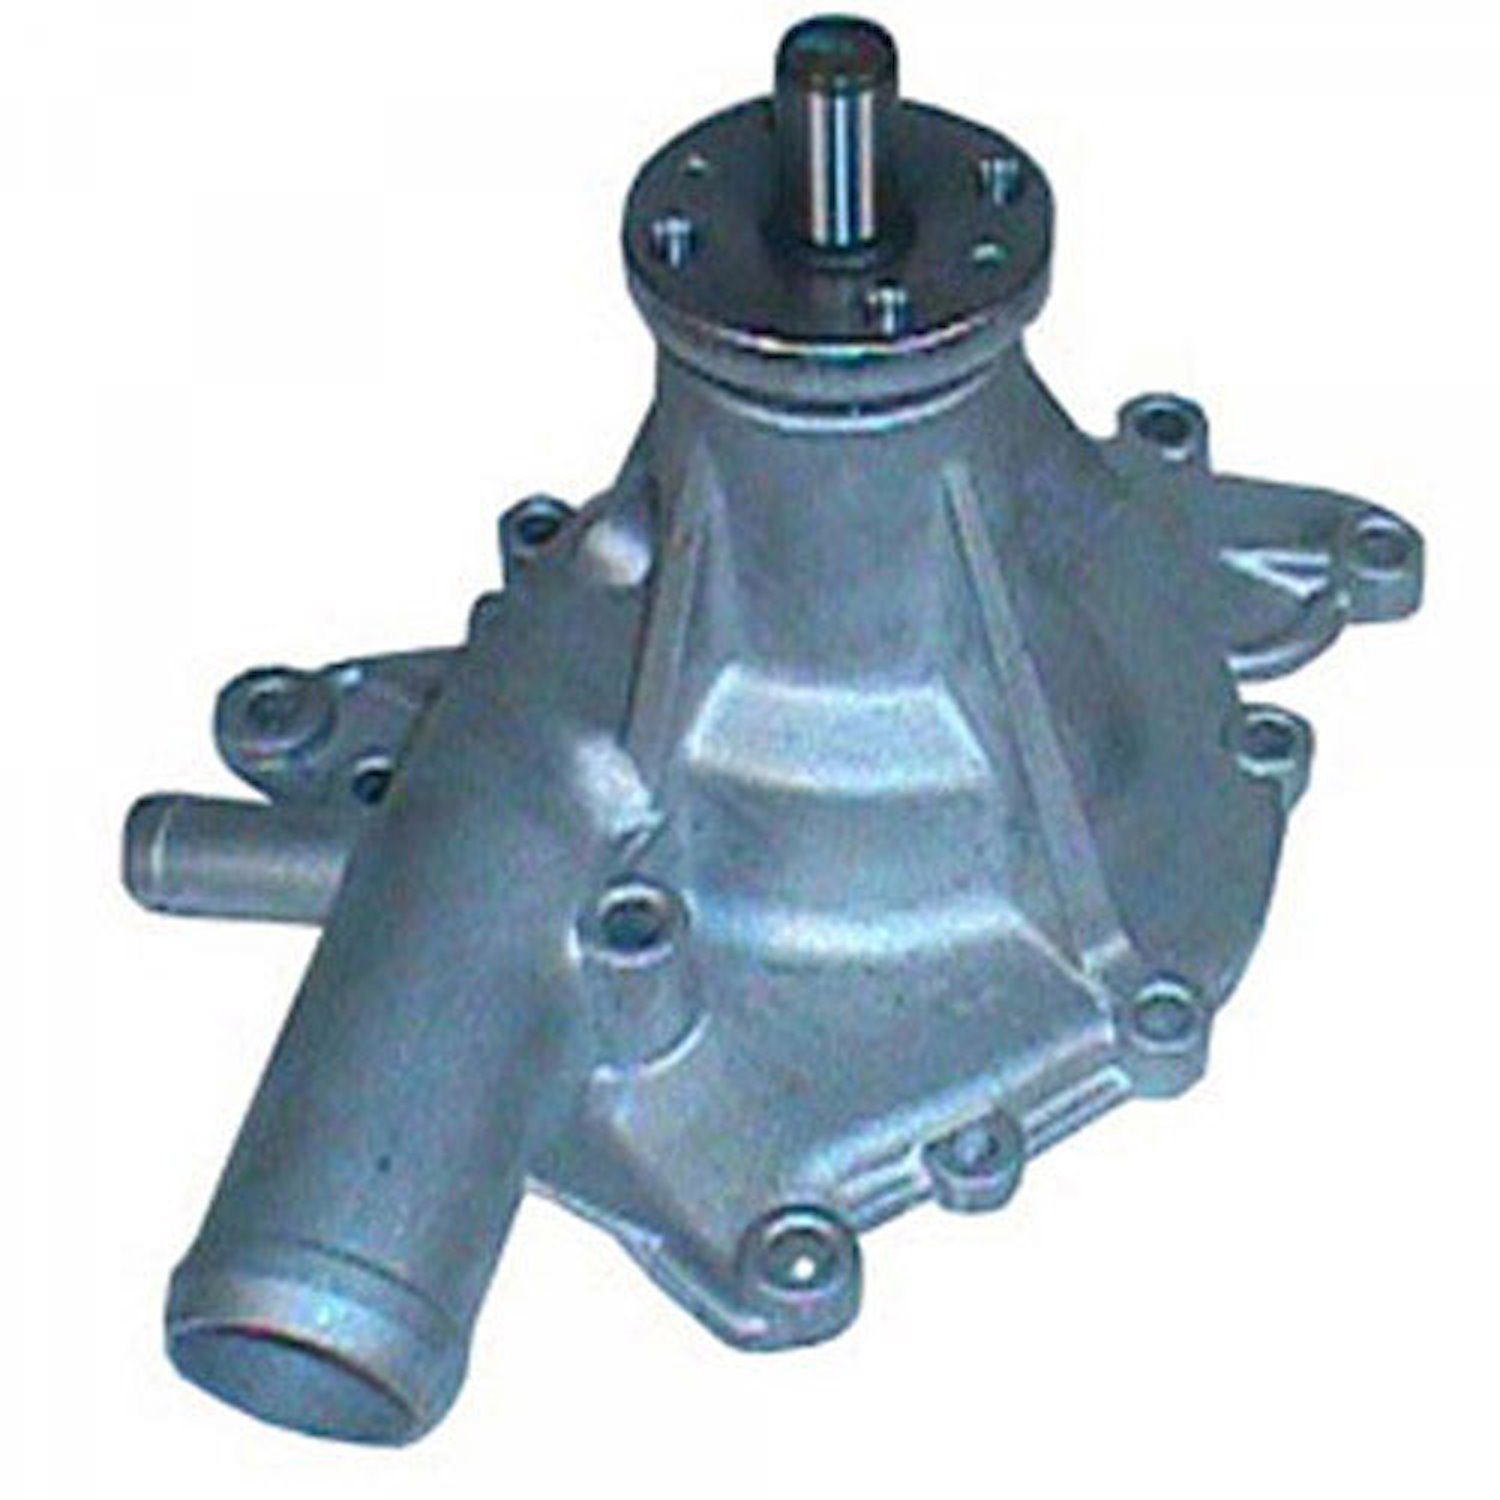 Water Pump for Select 1973-1989 Buick, Cadillac, Chevrolet, GMC, Oldsmobile, Pontiac